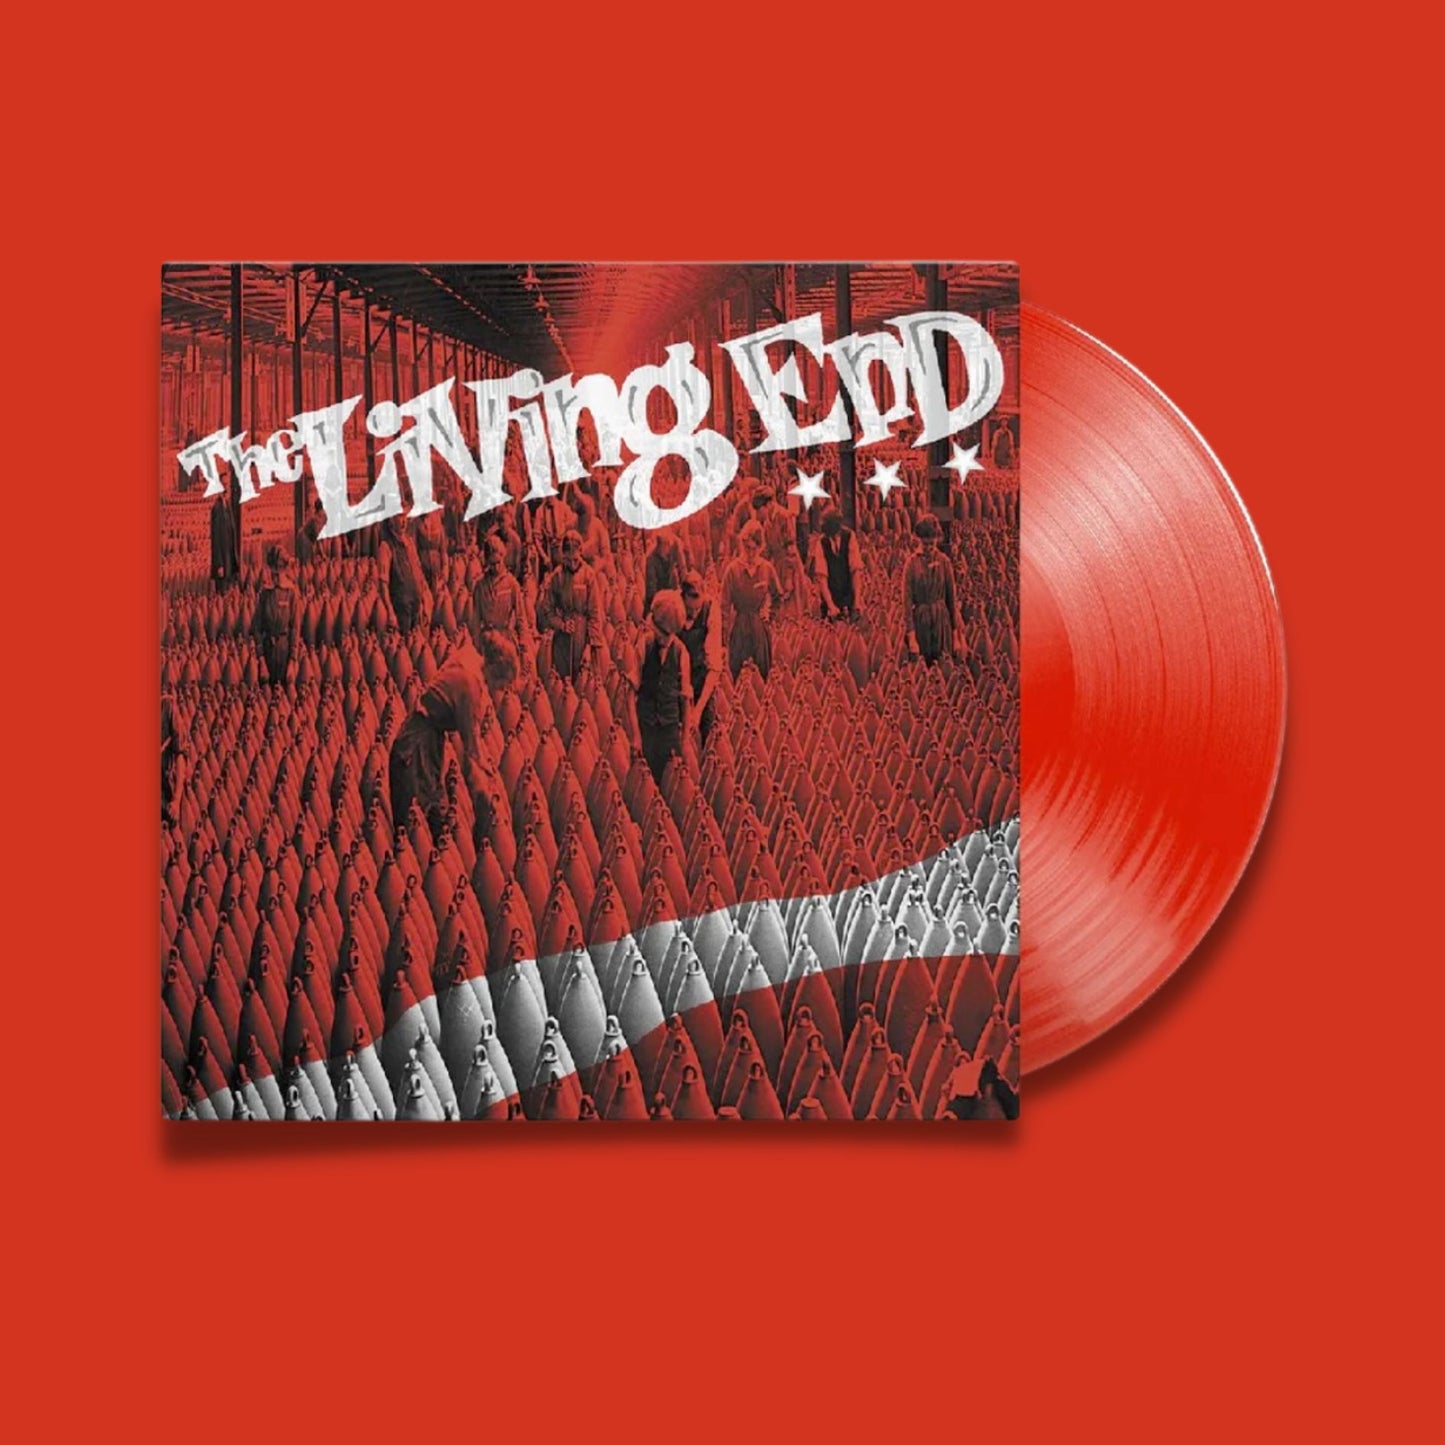 The Living End (25th Anniversary Red Edition)